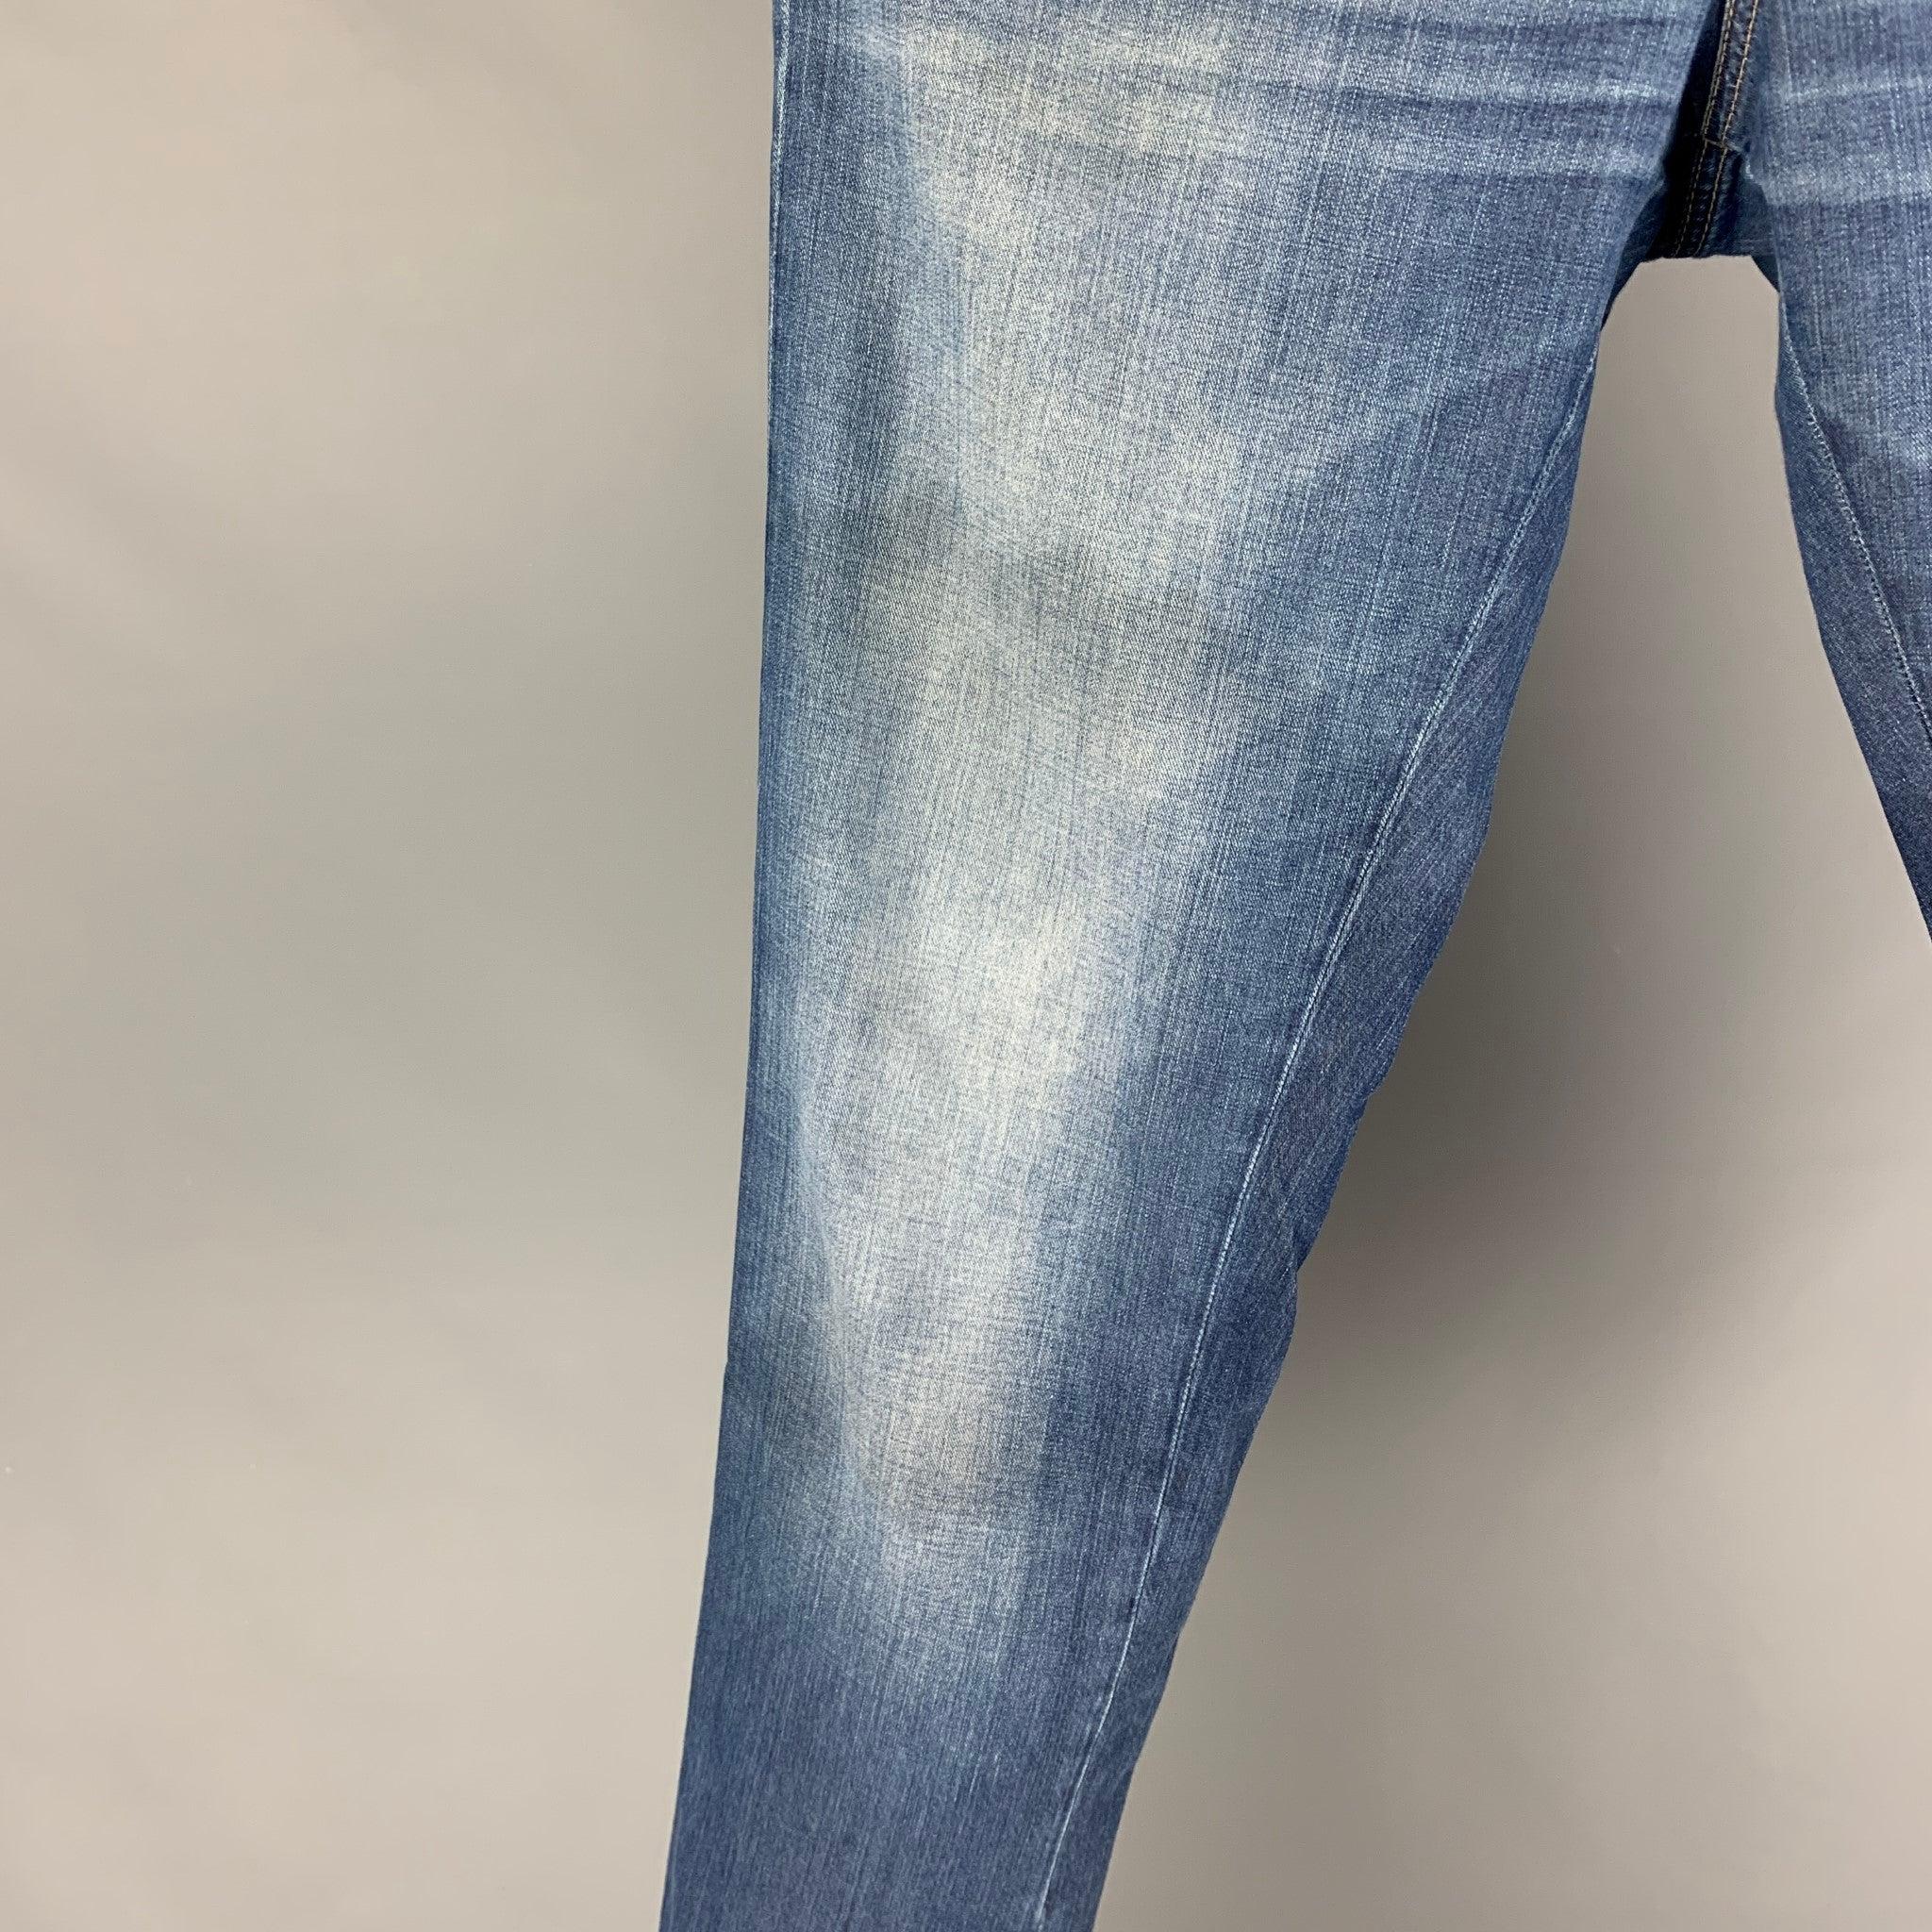 BRUNELLO CUCINELLI jeans comes in a blue washed cotton featuring a slim fit, contrast stitching, and a button fly closure. Made in Italy.
Good Pre-Owned Condition. Minor discoloration at top. As-is.  

Marked:   50 

Measurements: 
  Waist: 34